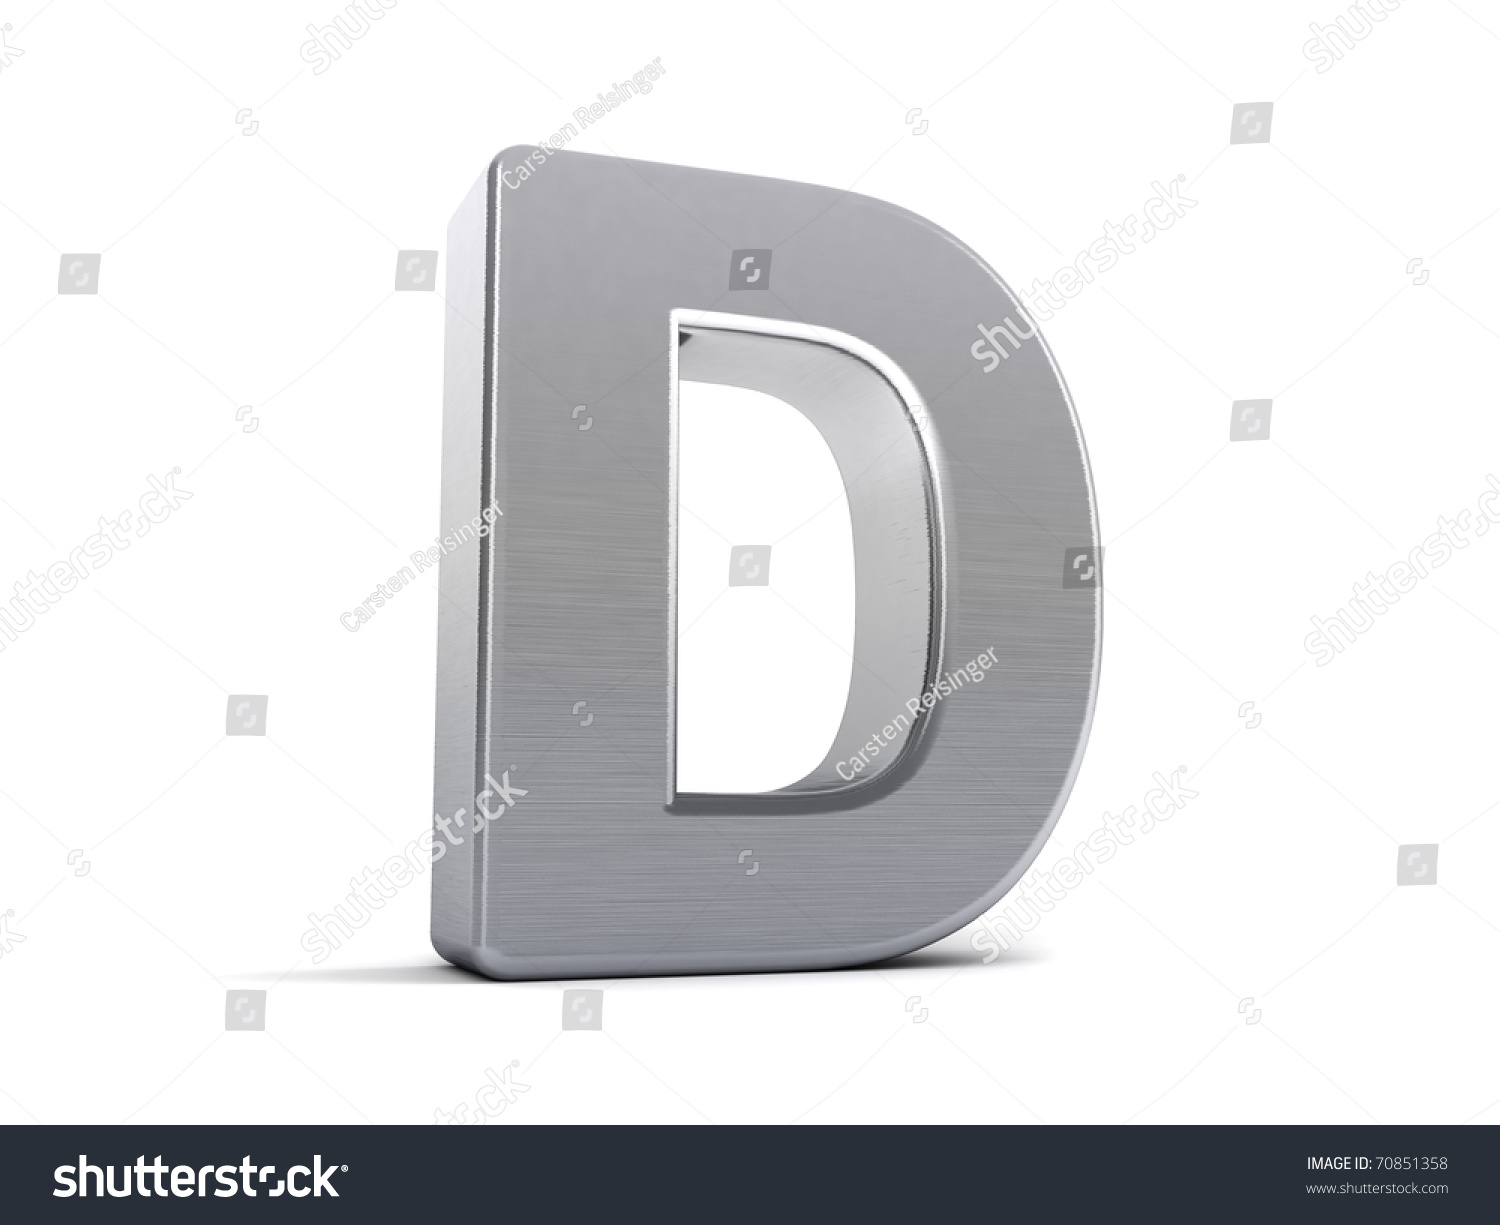 Letter D As A Brushed Metal 3d Object Stock Photo 70851358 : Shutterstock